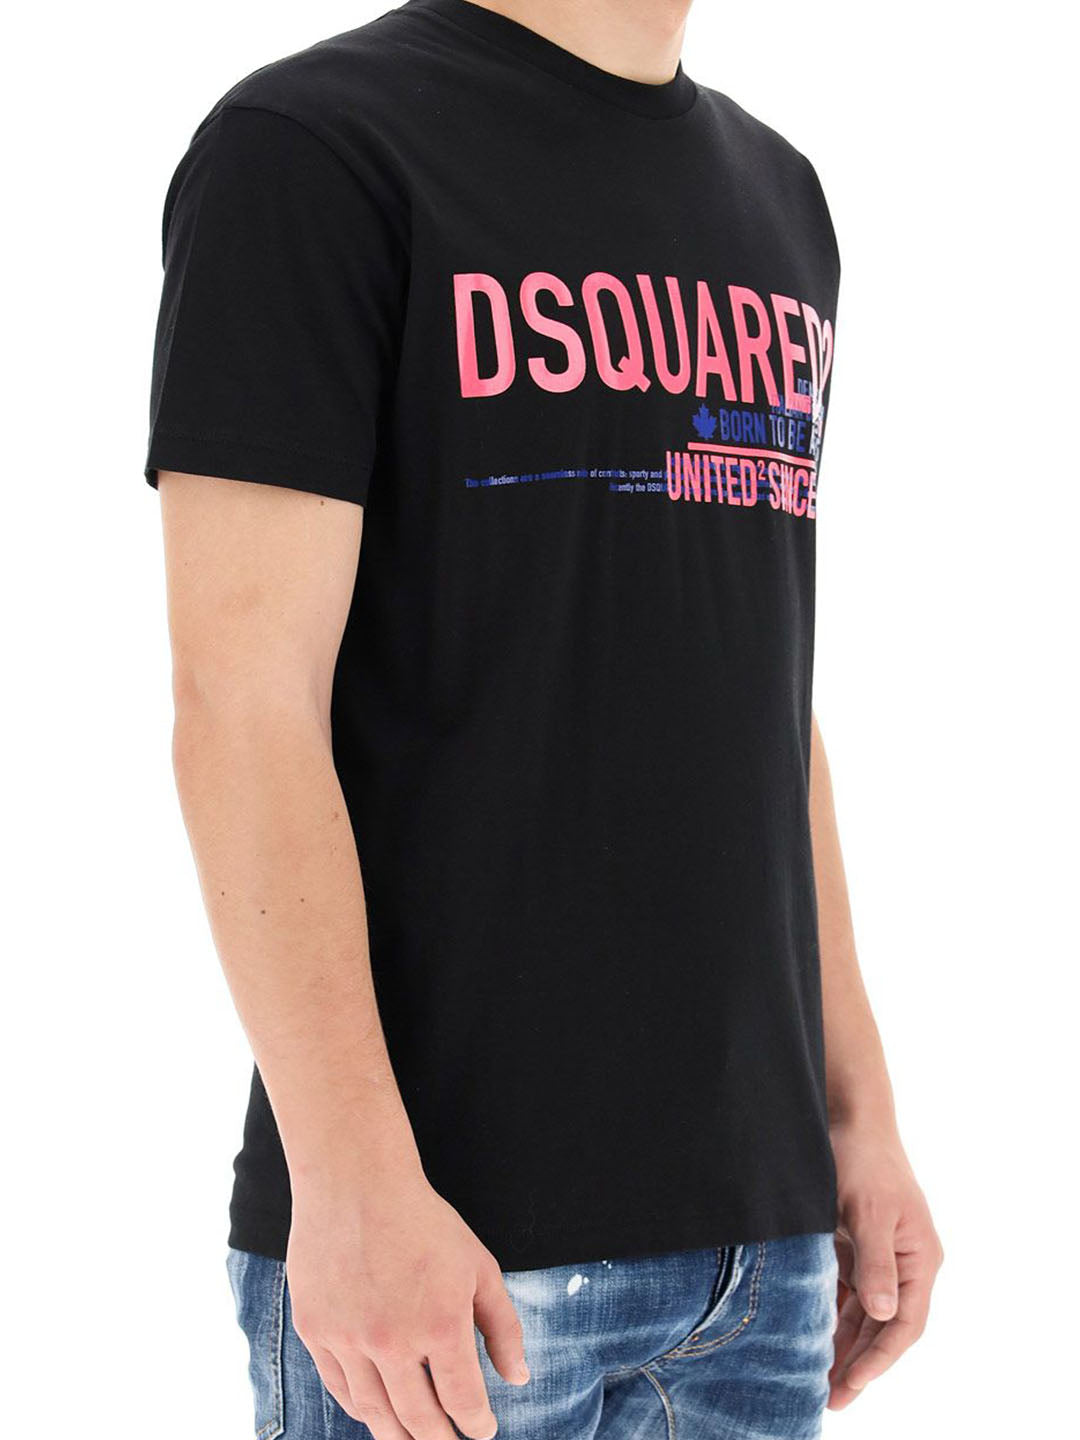 DSQUARED2 black cotton T-shirt – To Be Outlet